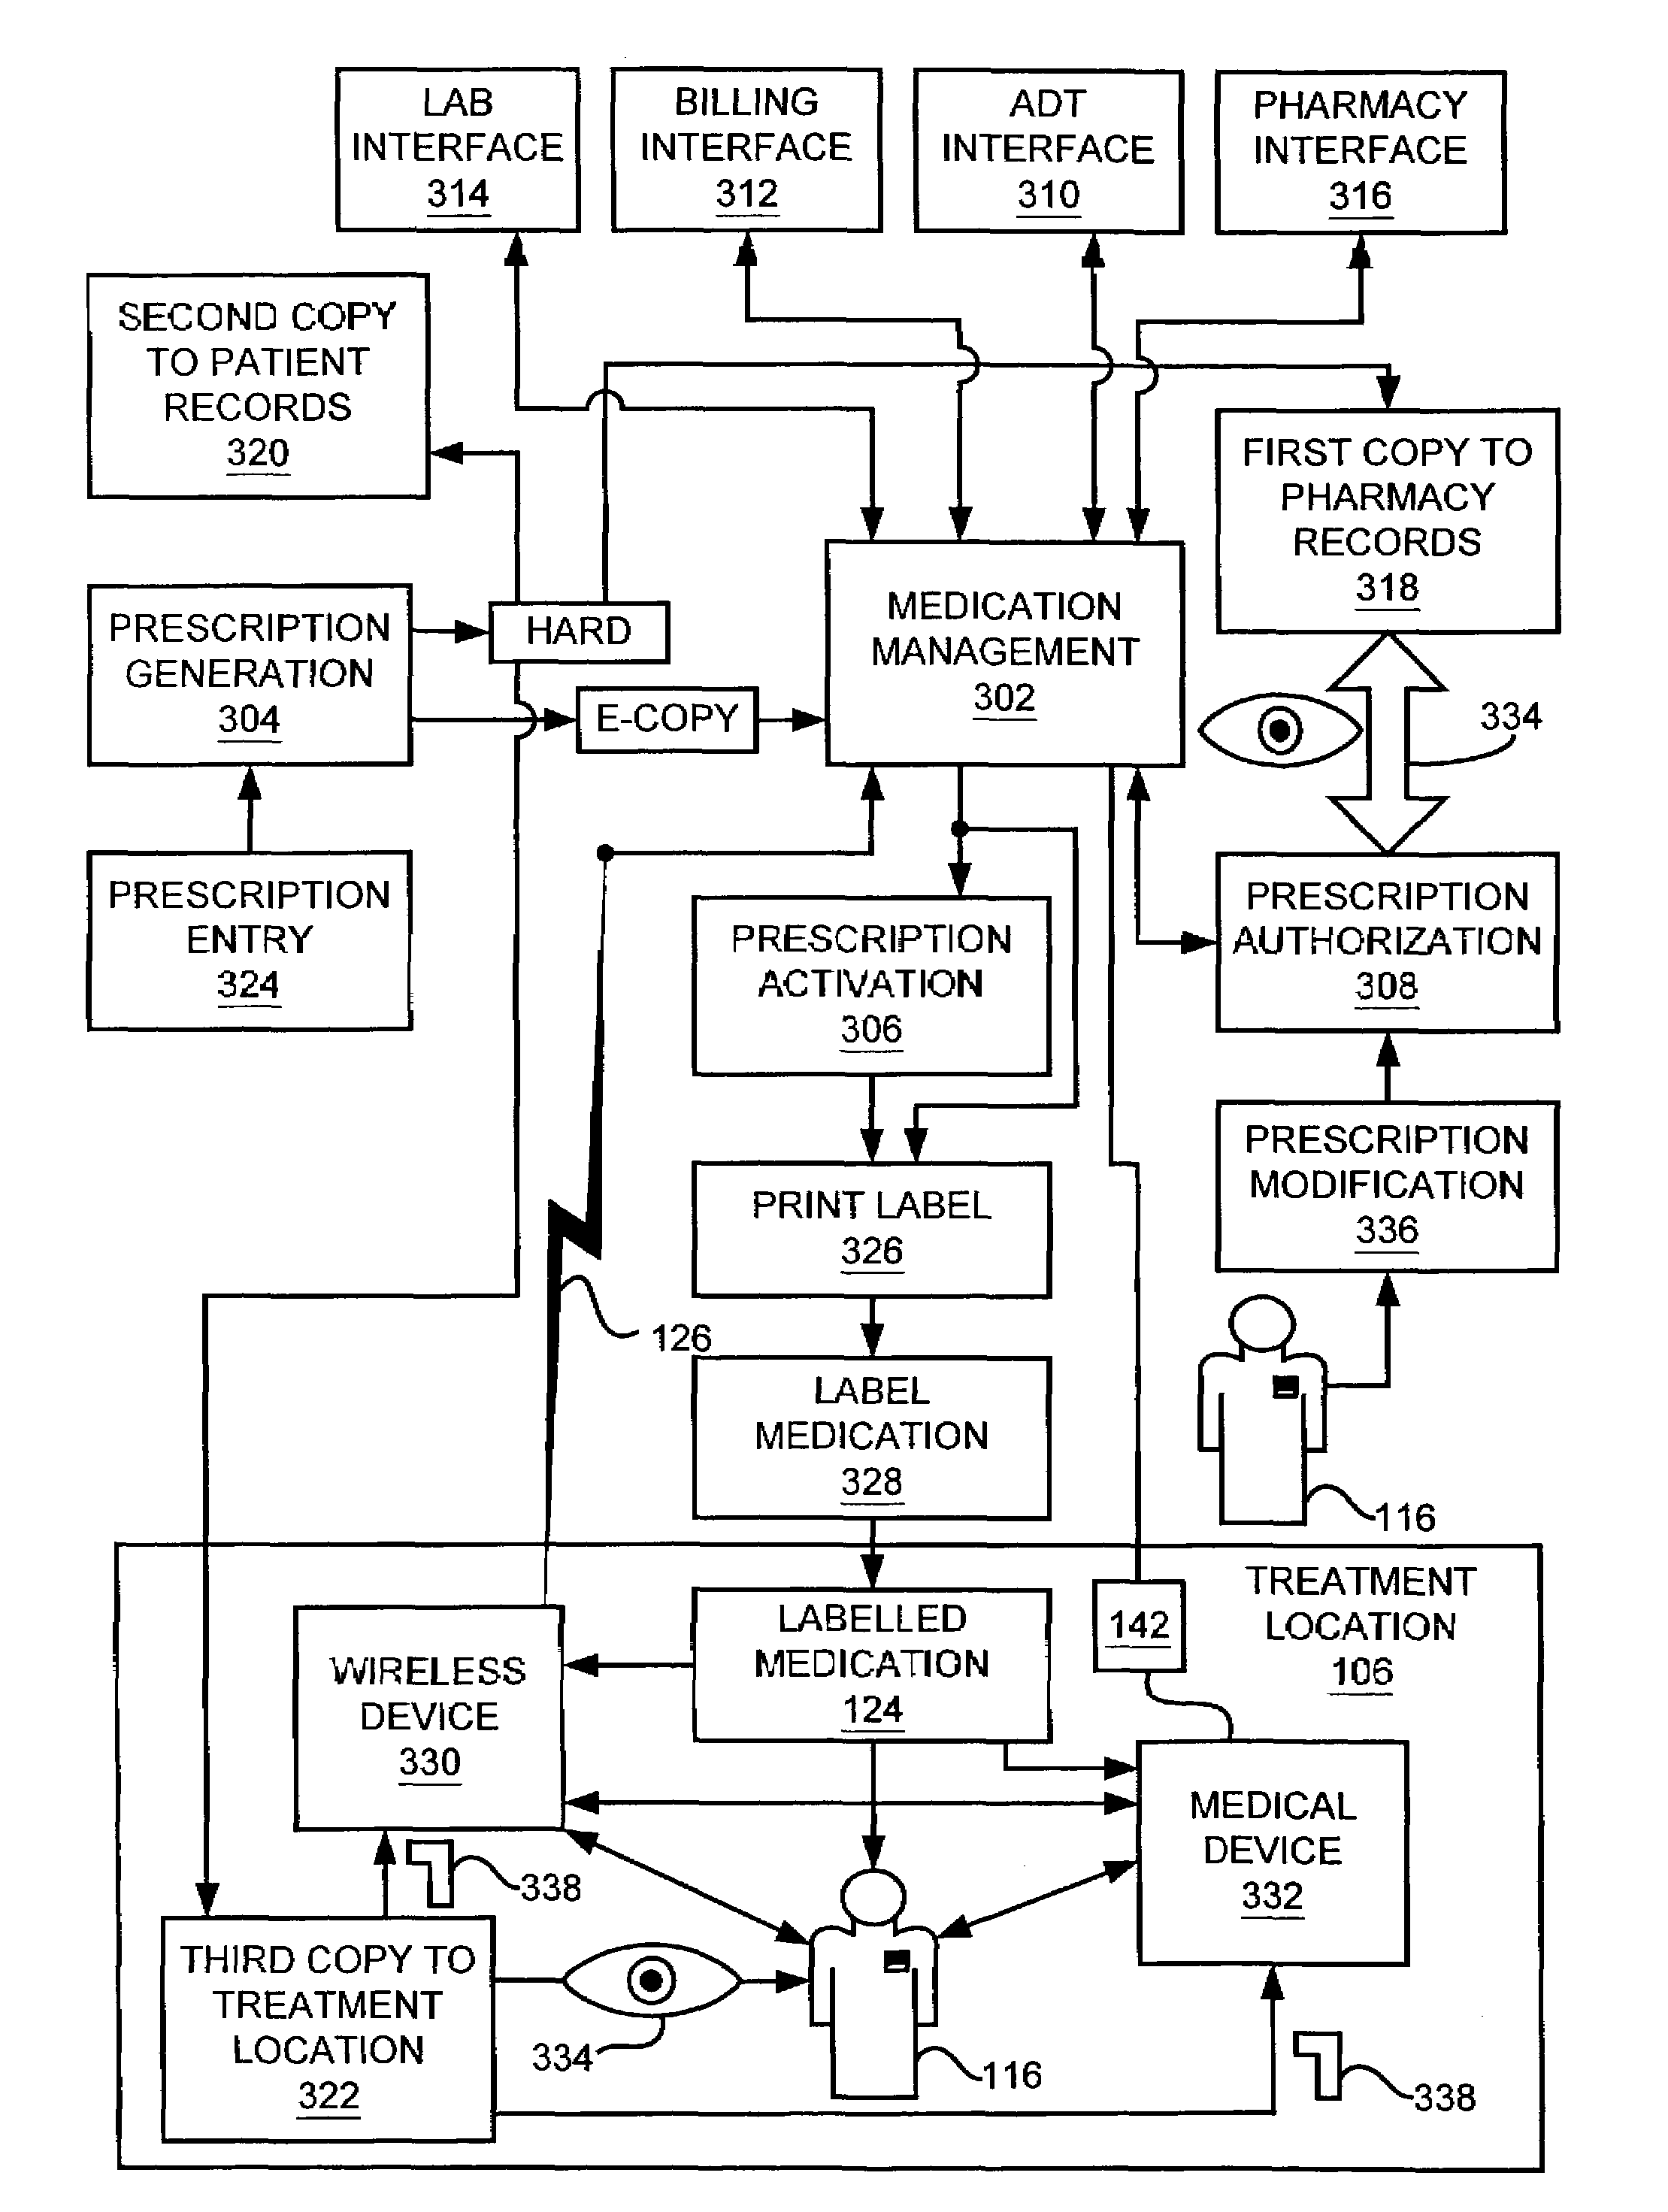 System and method for identifying data streams associated with medical equipment